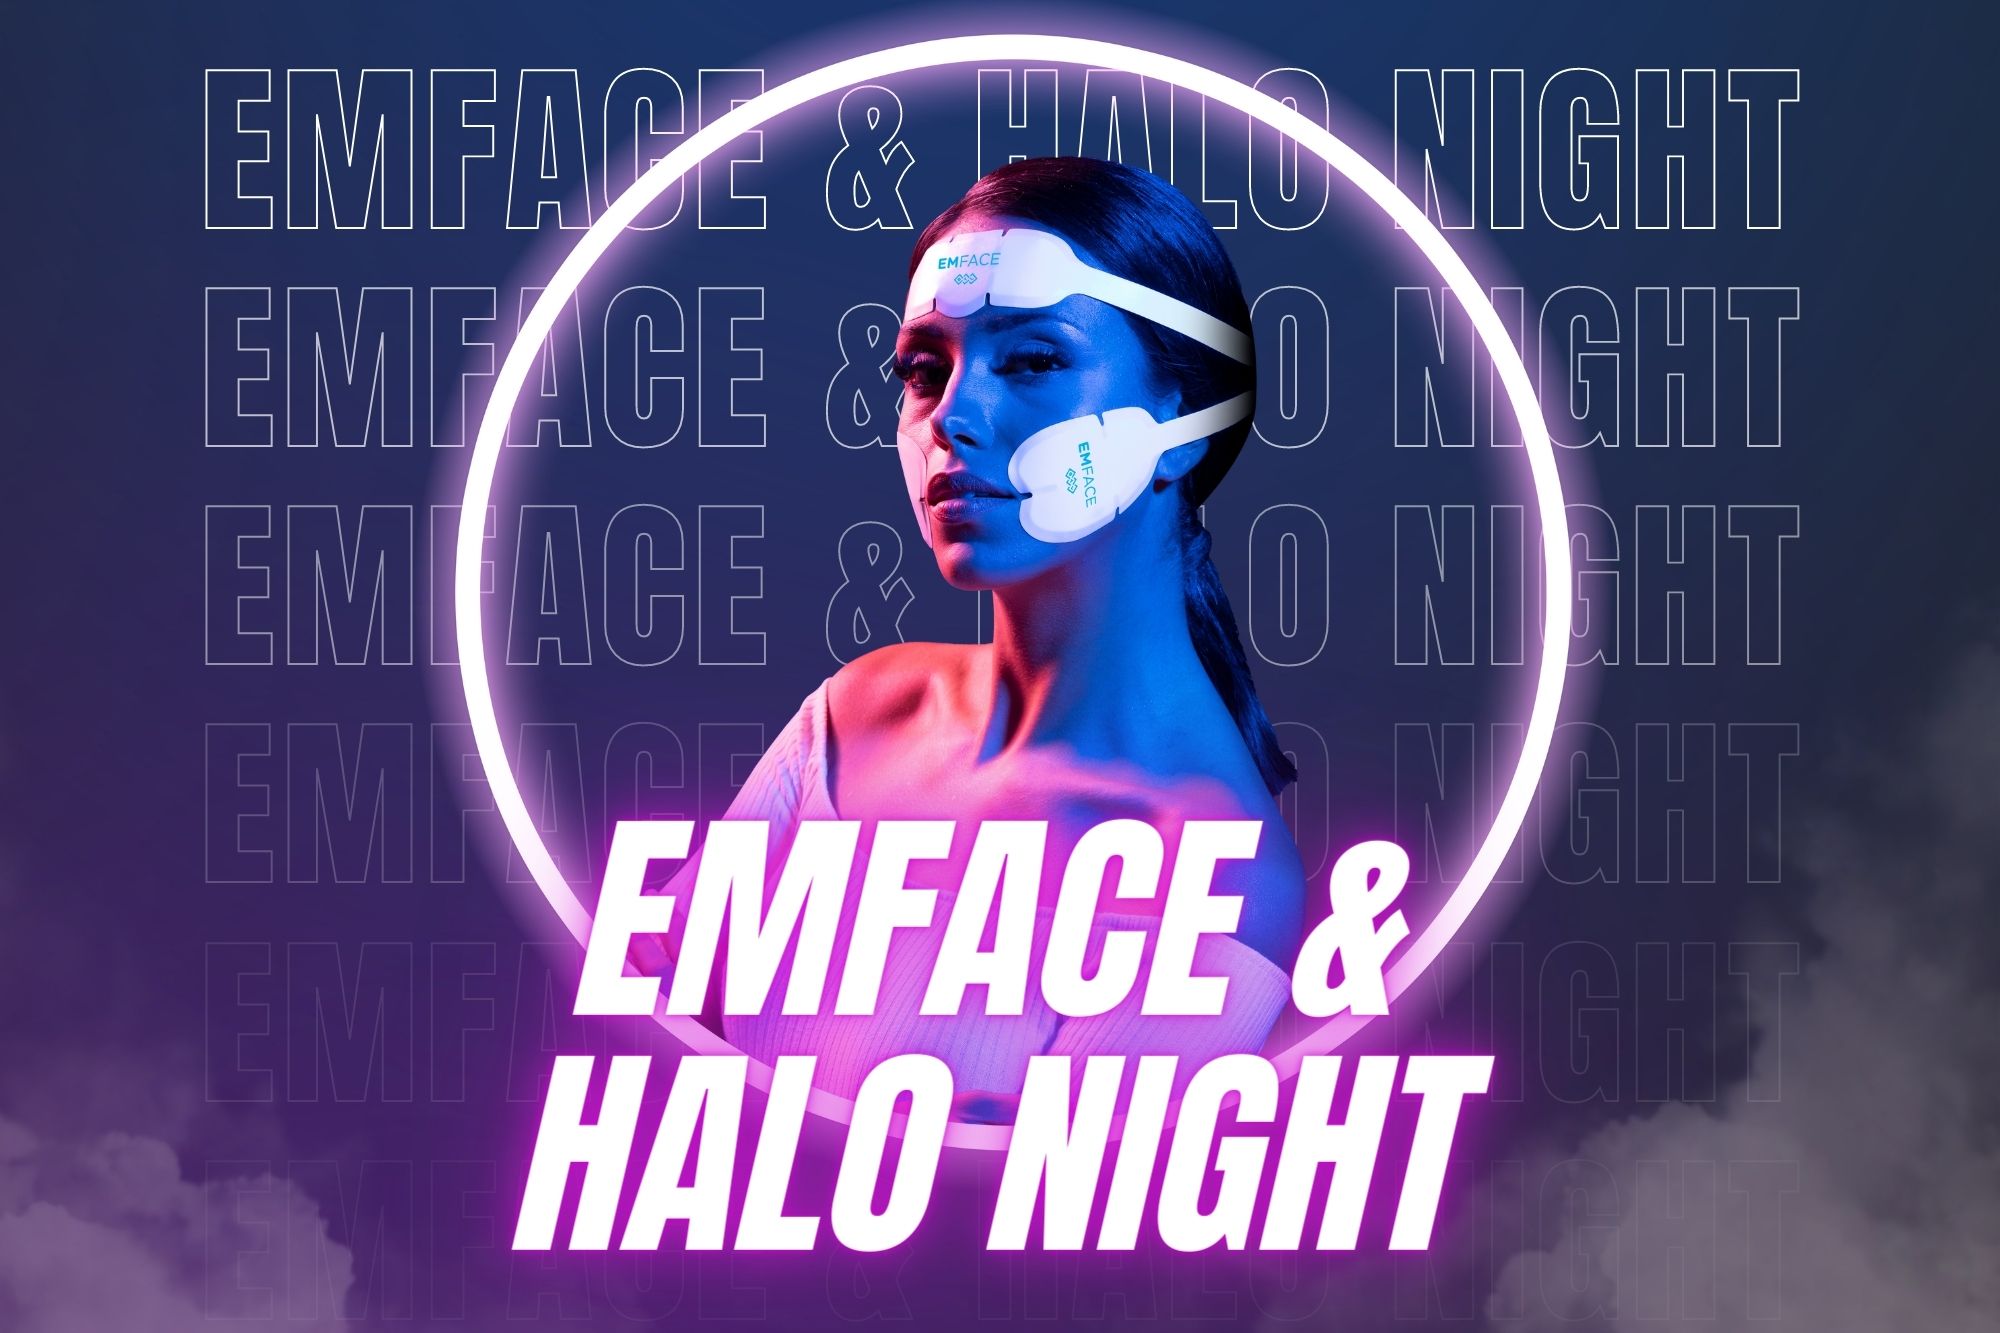 Advertisement for Halo and Emface Night. Woman with emface pads placed on her face. A purple ring of light surrounds her.